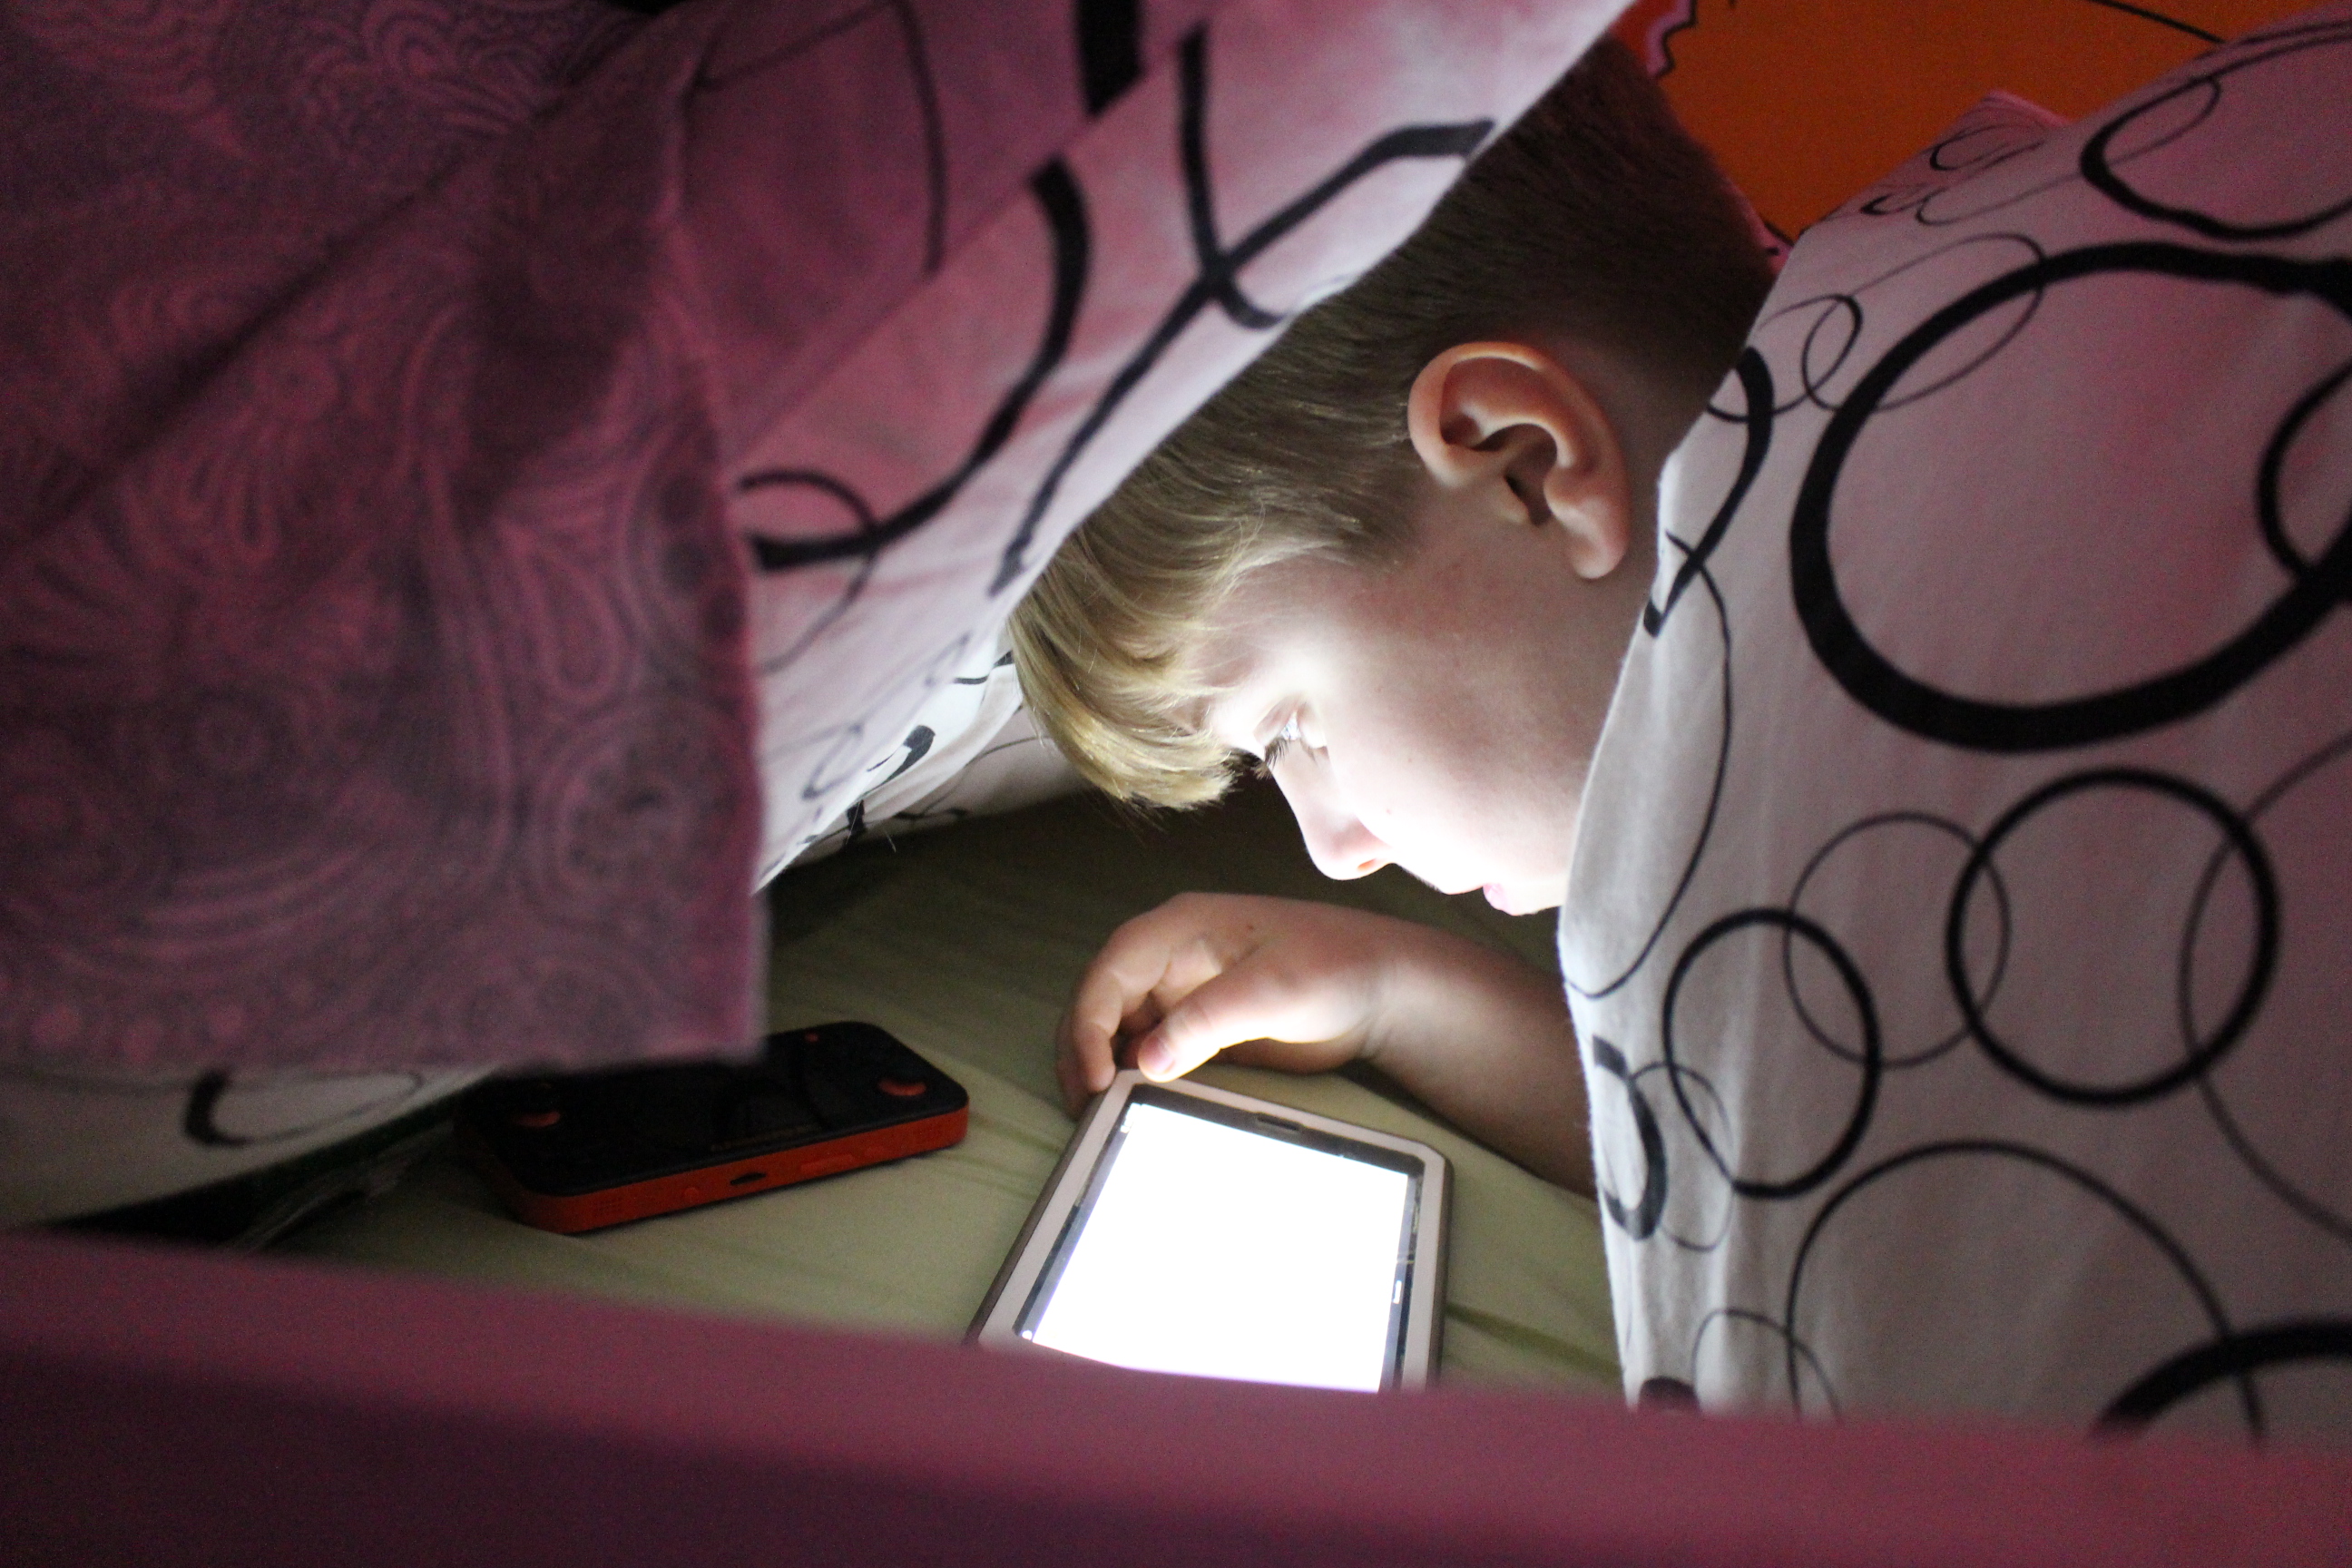 Photo of a child using a tablet at night